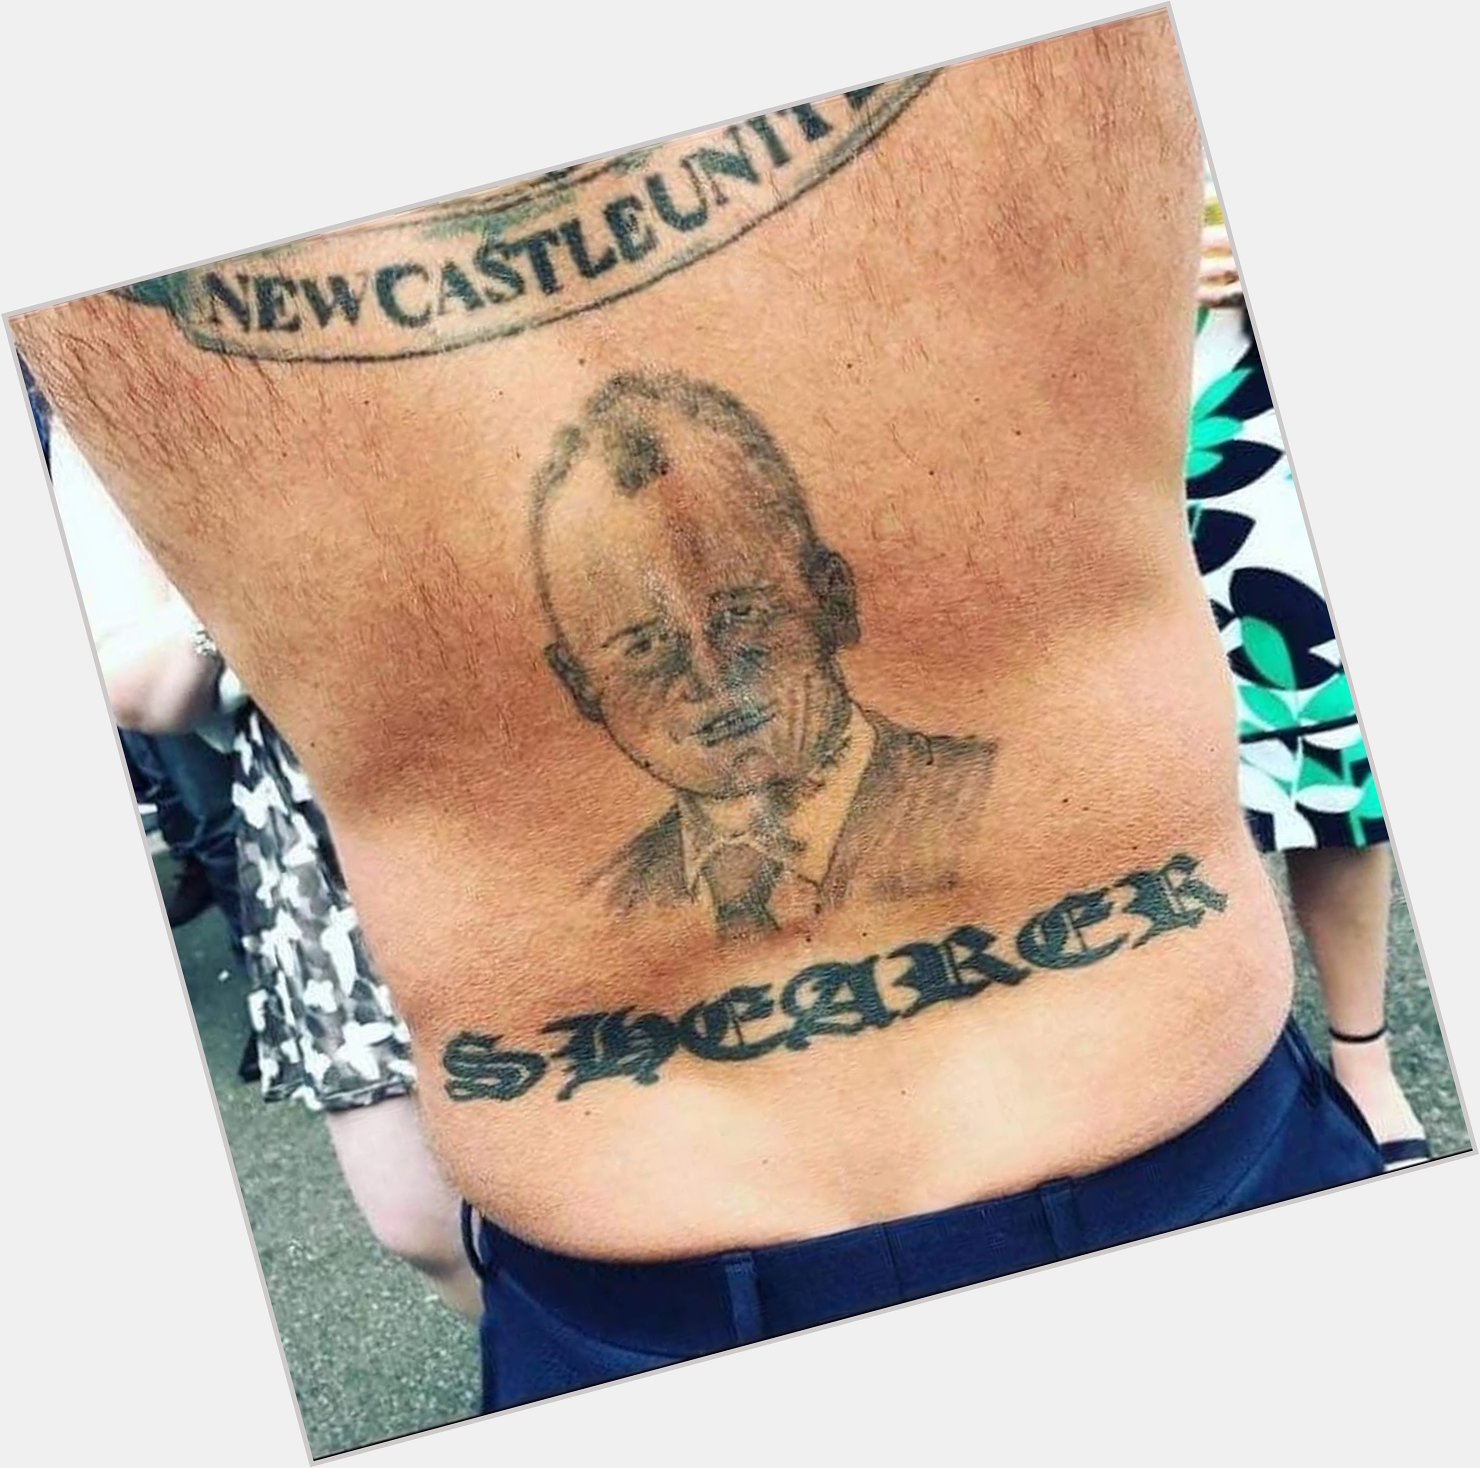 Happy birthday Alan Shearer Never forget this iconic tattoo 